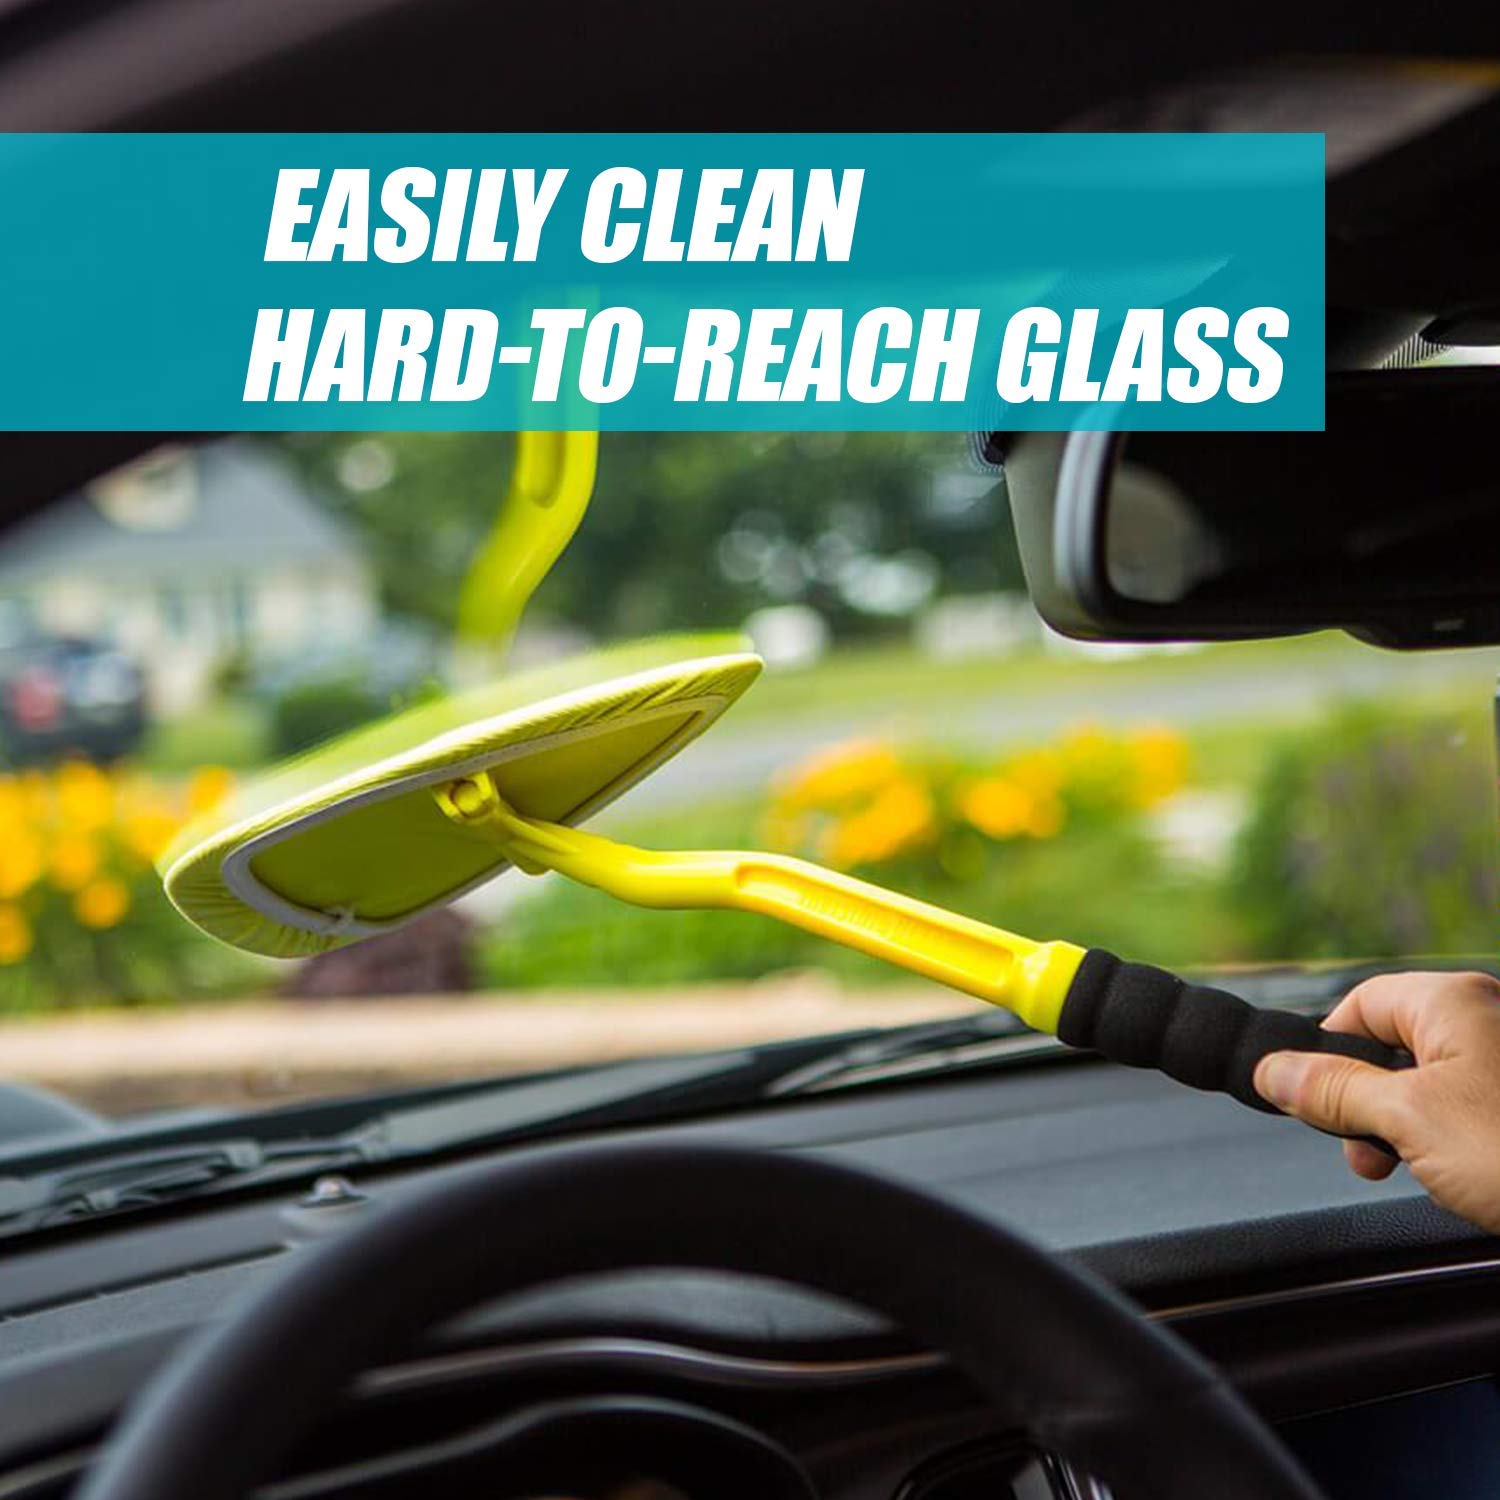 HugeAuto Car Windscreen Cleaner Tools Adjustable Handle Auto Window Glass Cleaning Brush Tools From Inside Window Glass Cleaning Tools for Home Kichens With Cloth and Long Handle 2-pack 